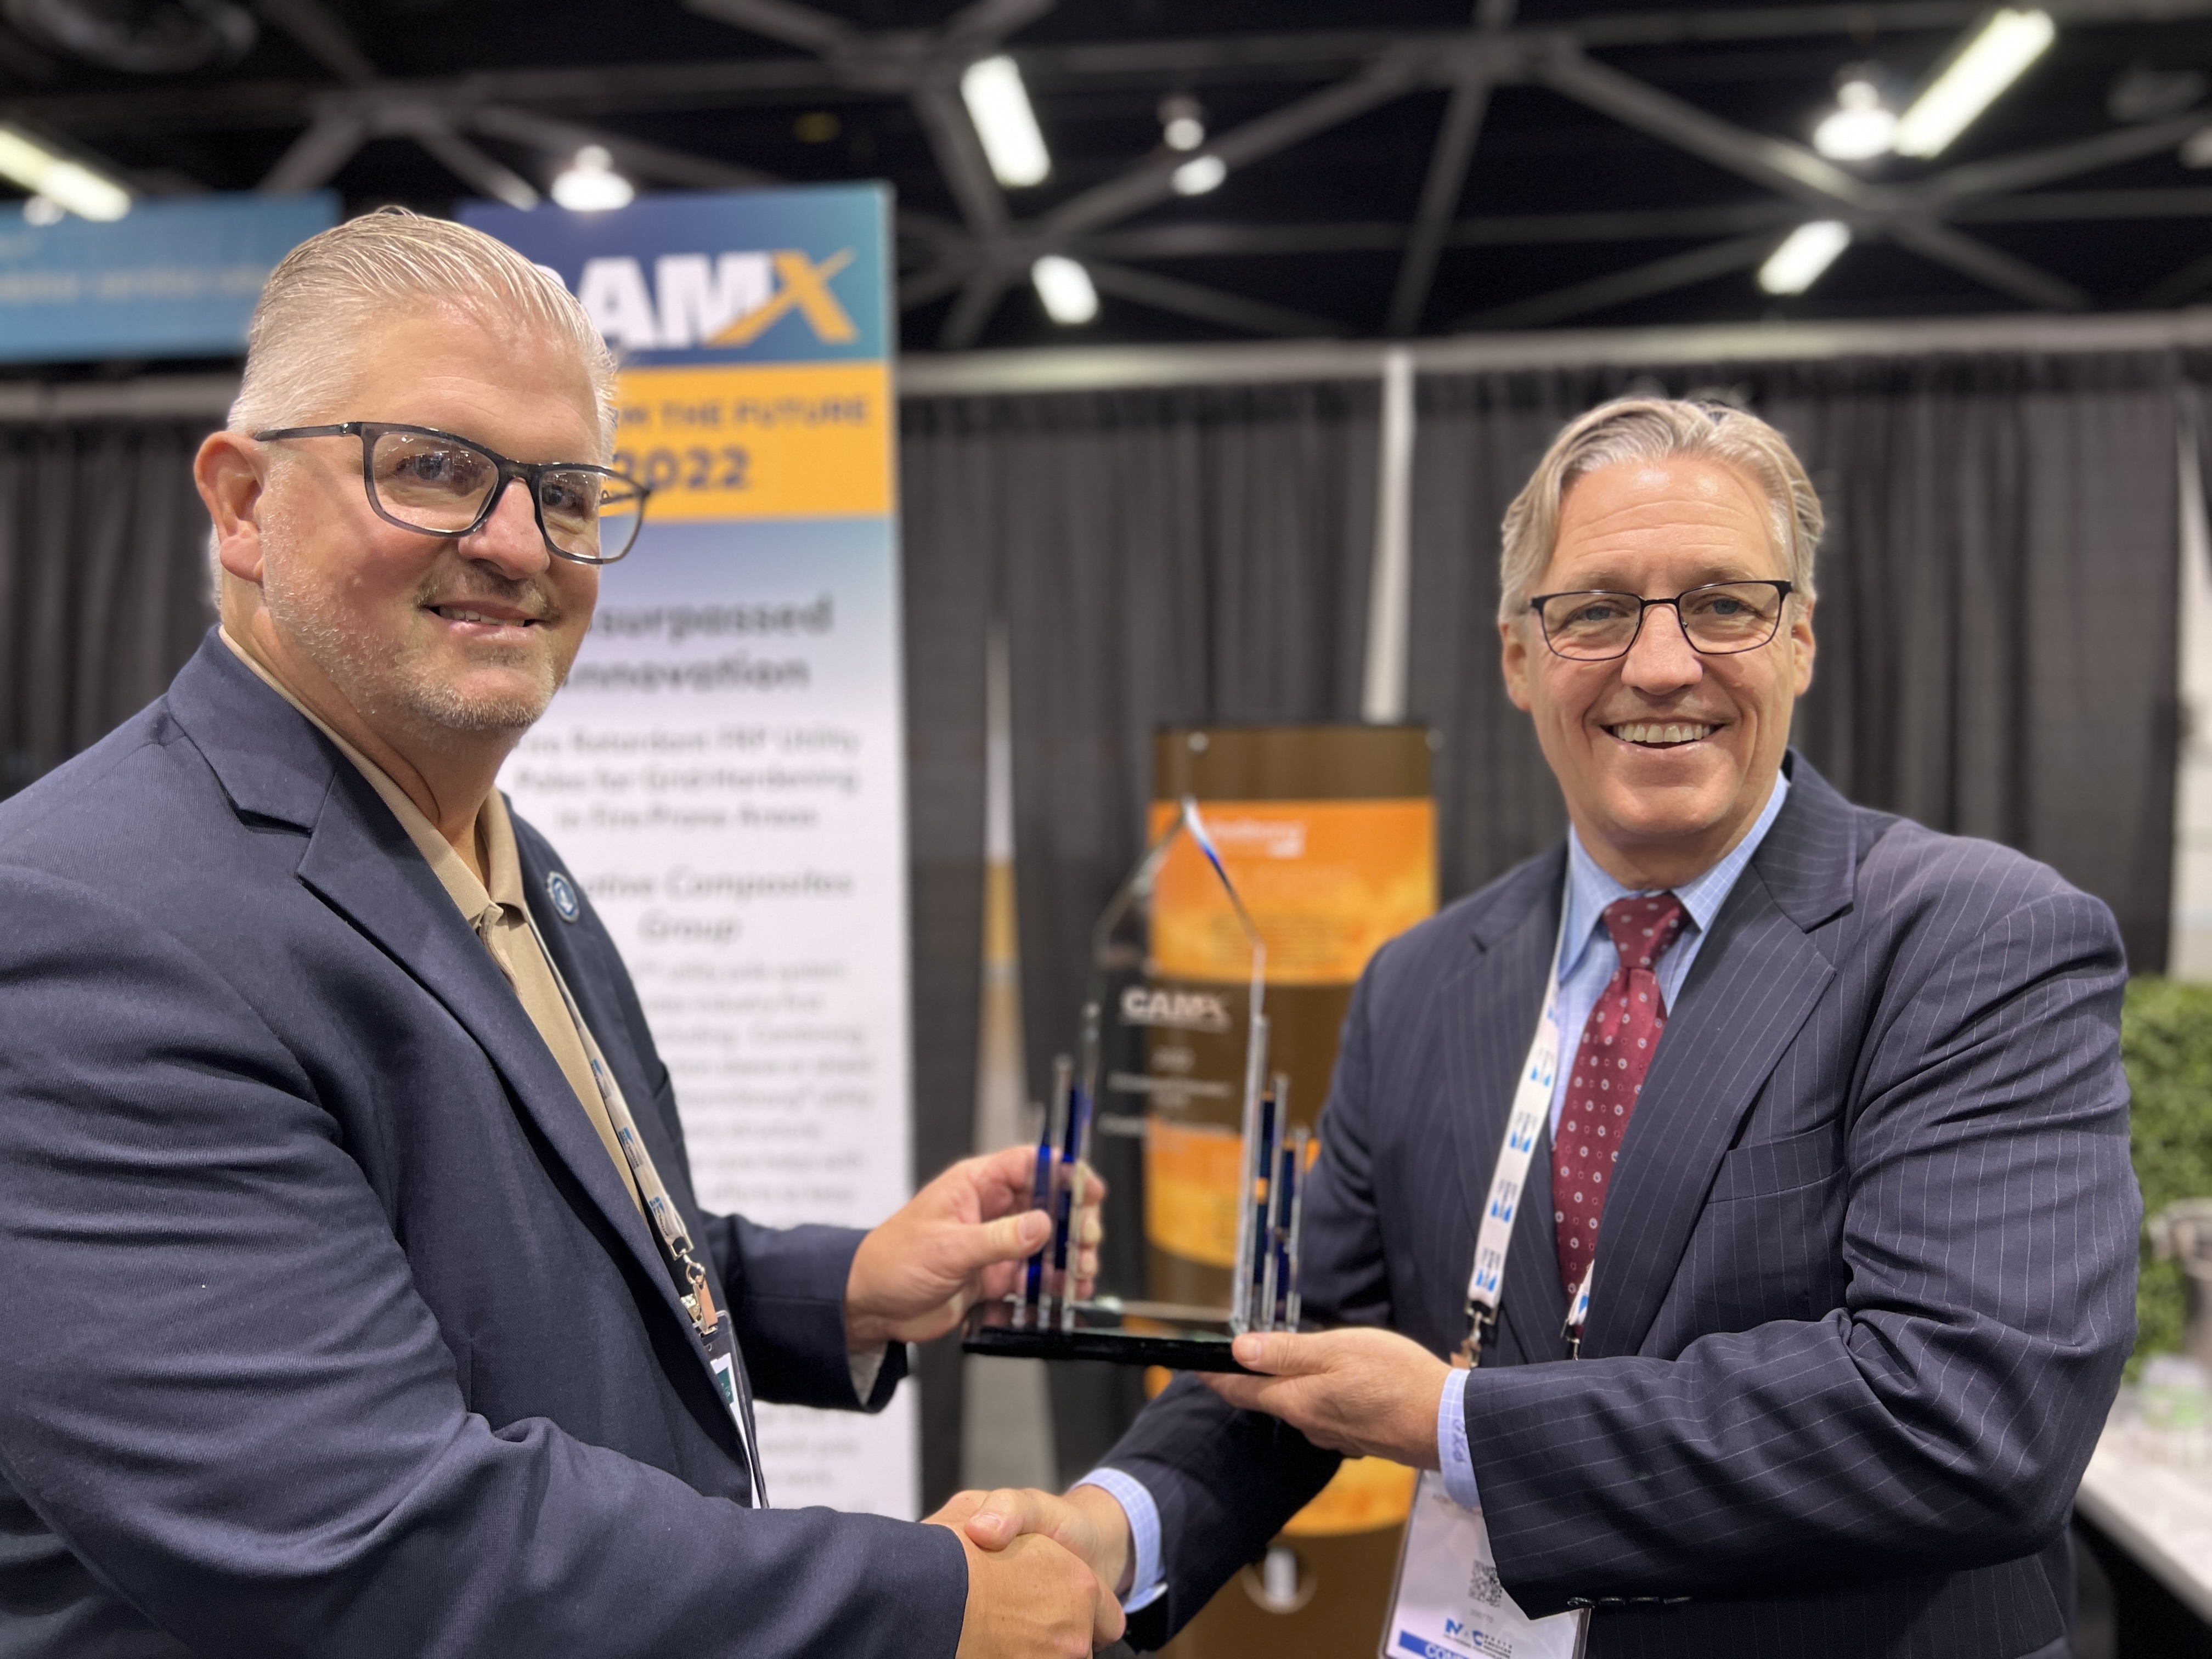 Creative Composites Group is Awarded Unsurpassed Innovation Award from CAMX